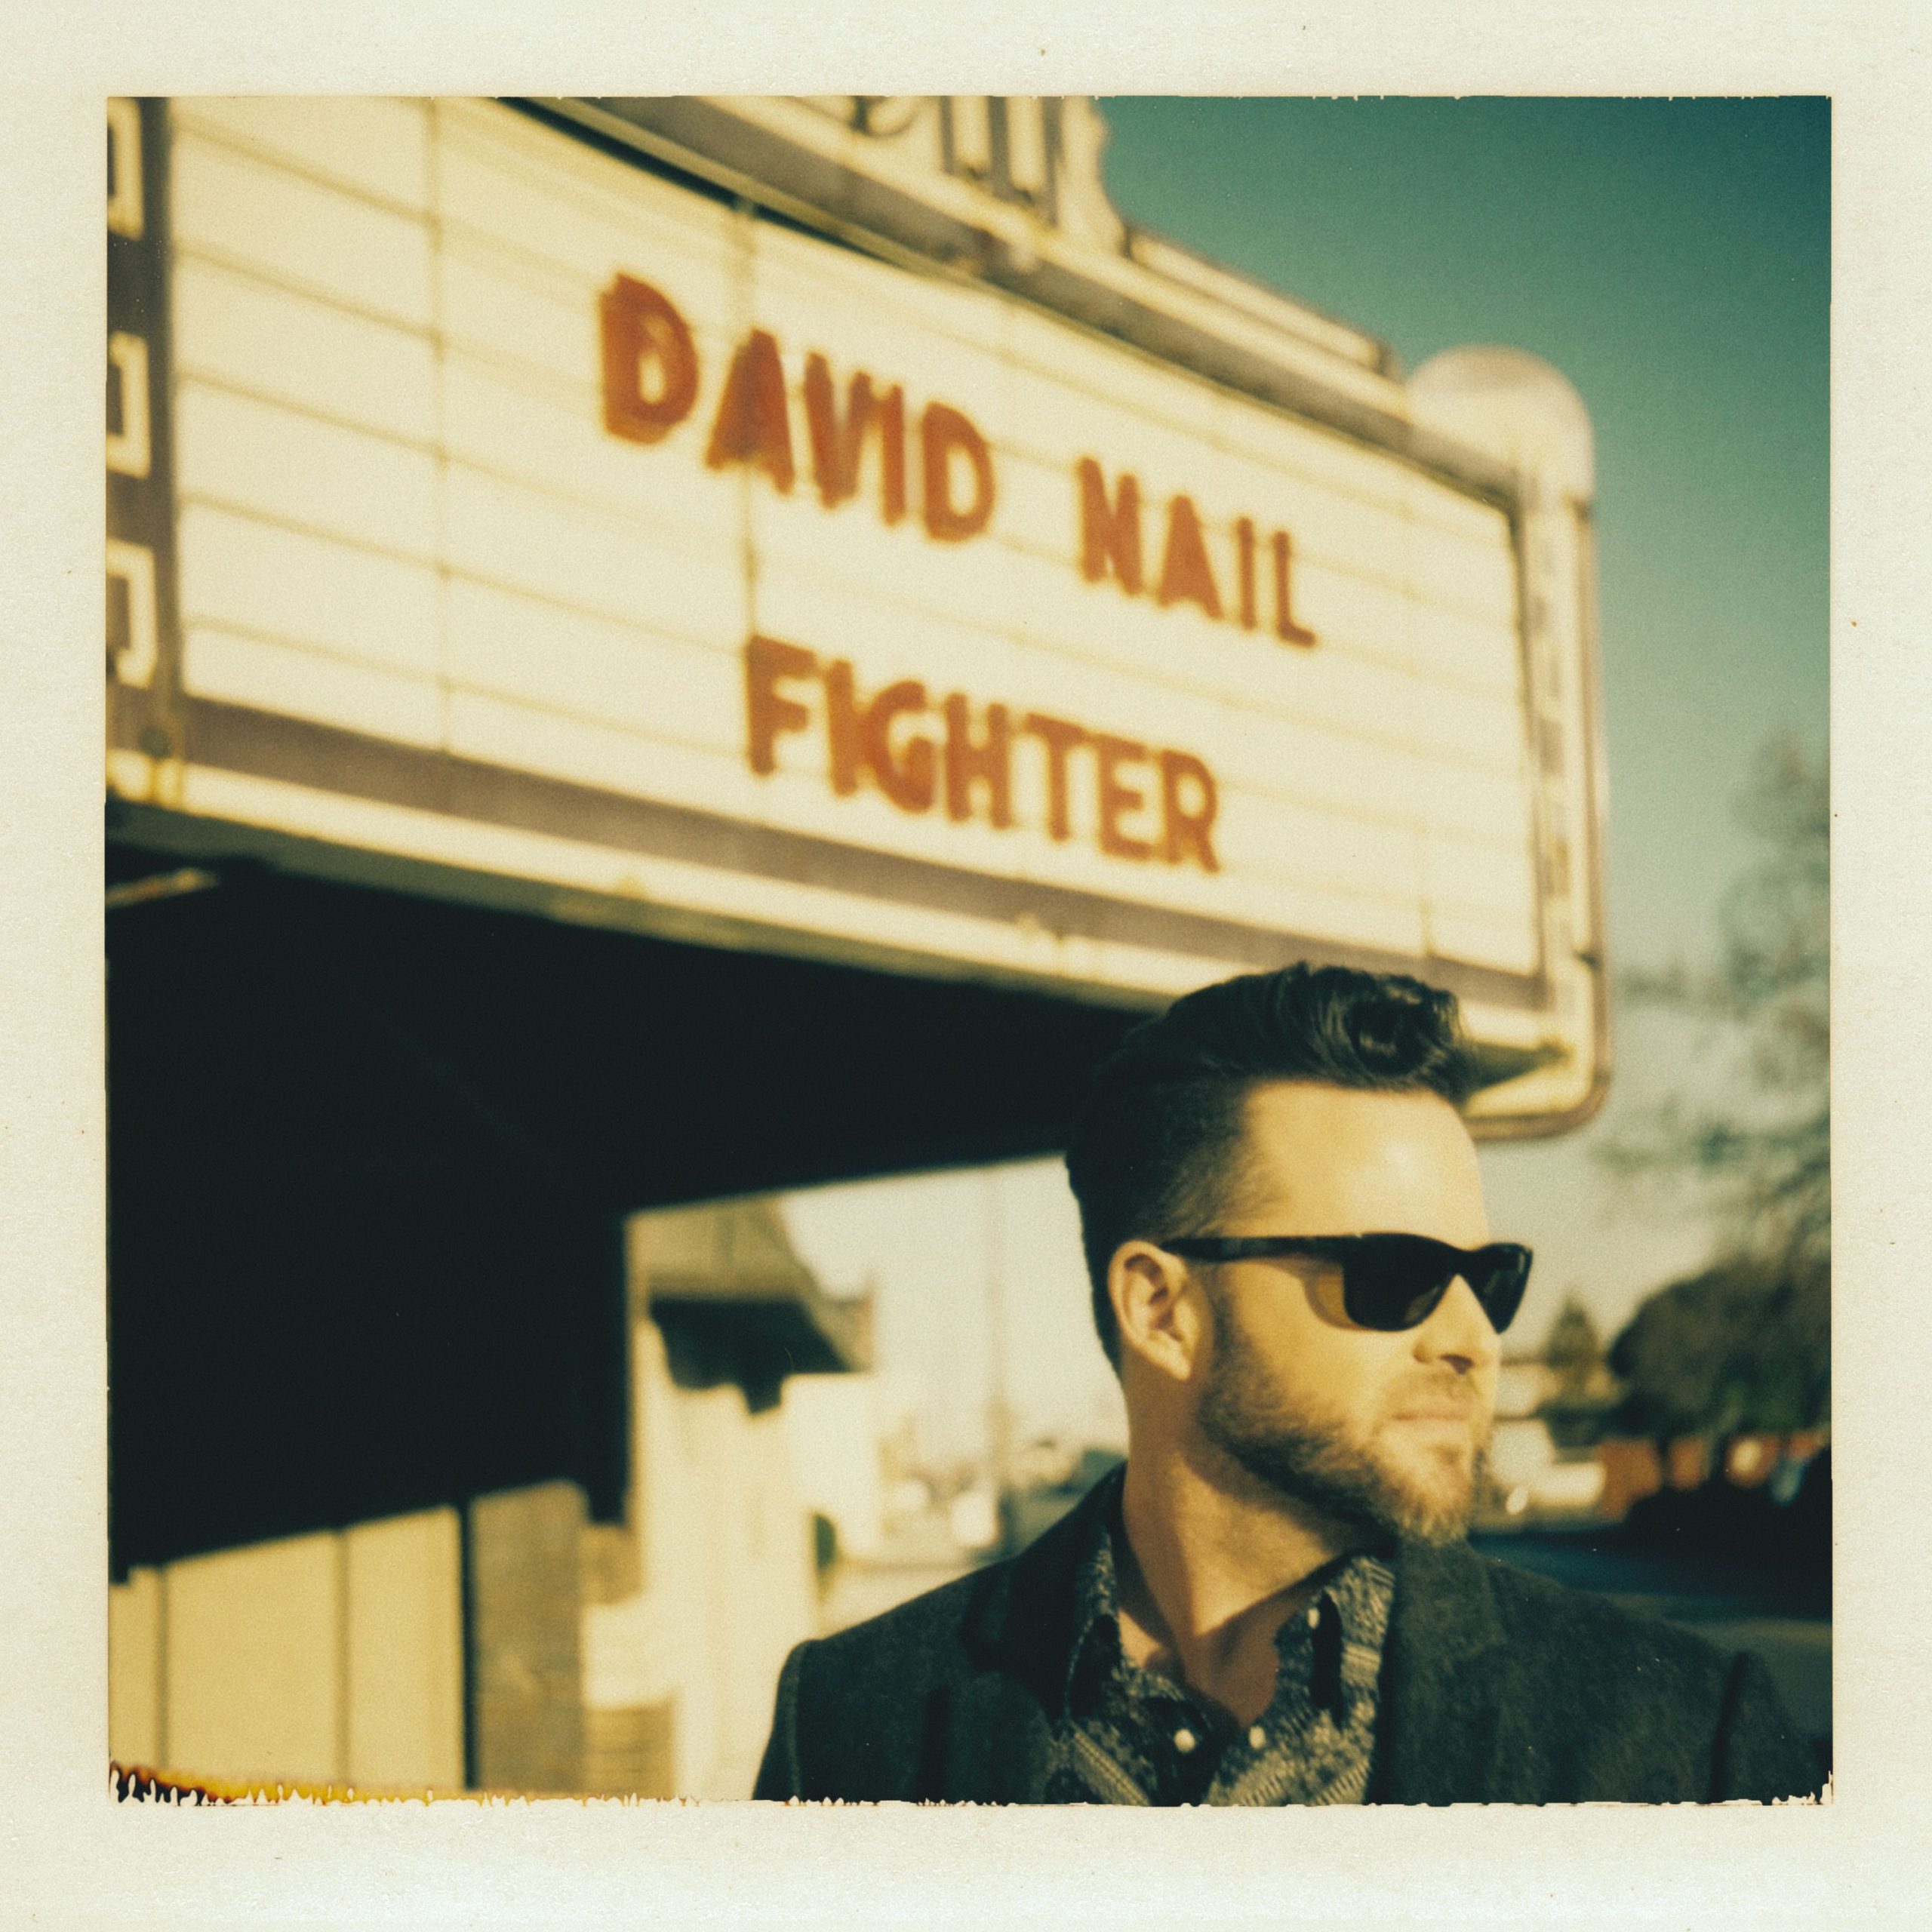 DAVID NAIL REVEALS TRACK LISTING  FOR FOURTH STUDIO ALBUM, FIGHTER – Features Top 20 Single “Night’s On Fire”